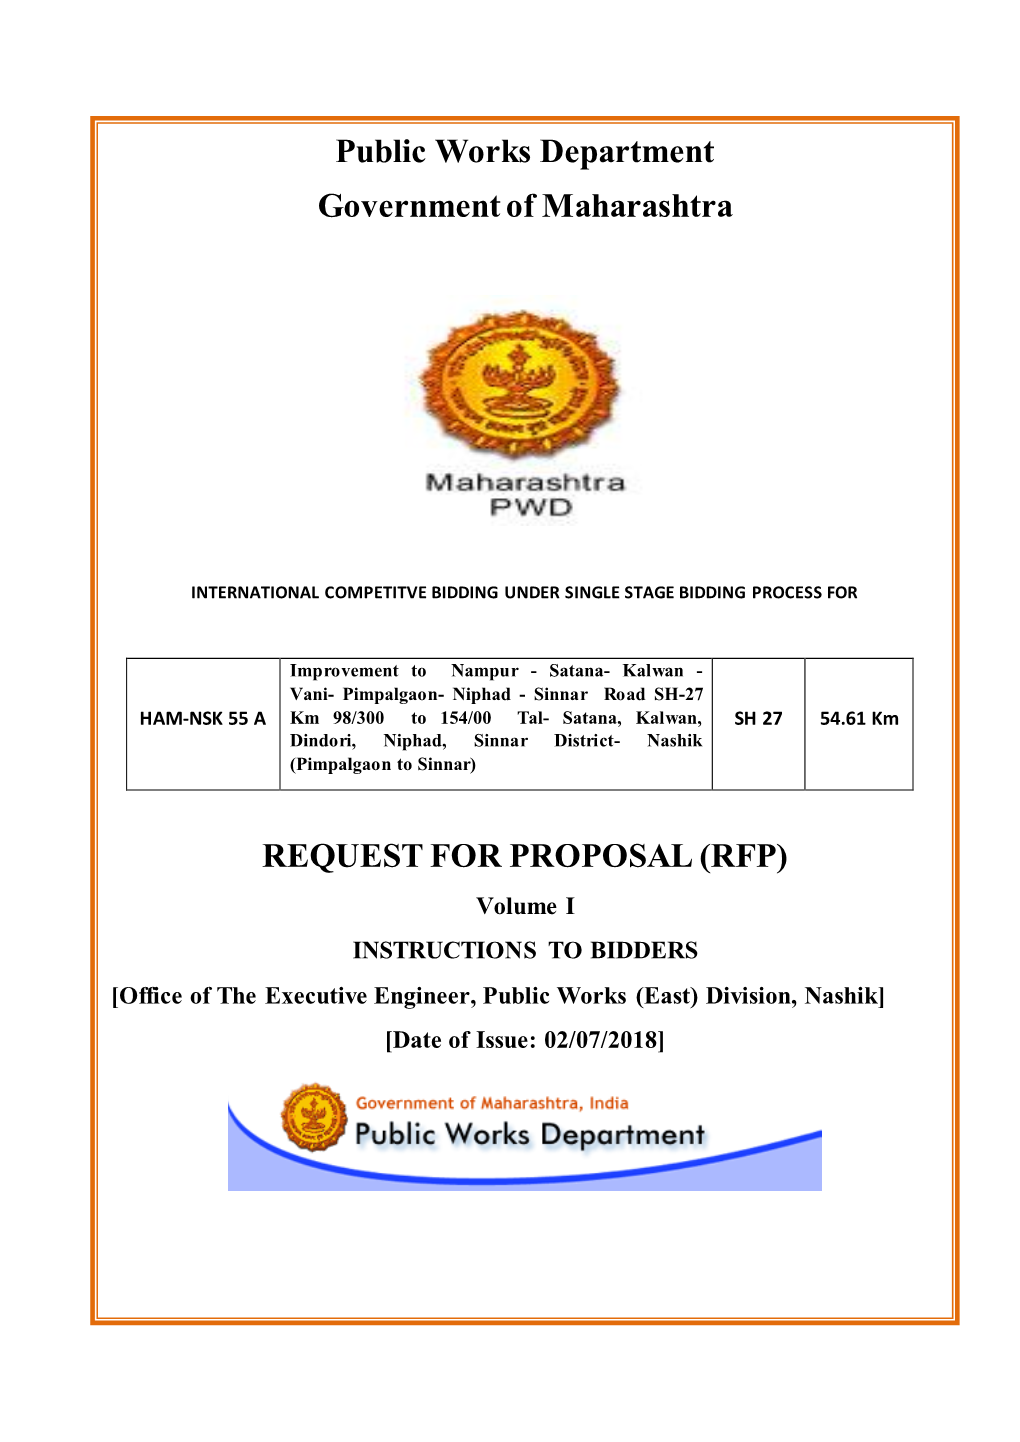 RFP Document, Will Be Deemed to Form Part of the Bidding Documents